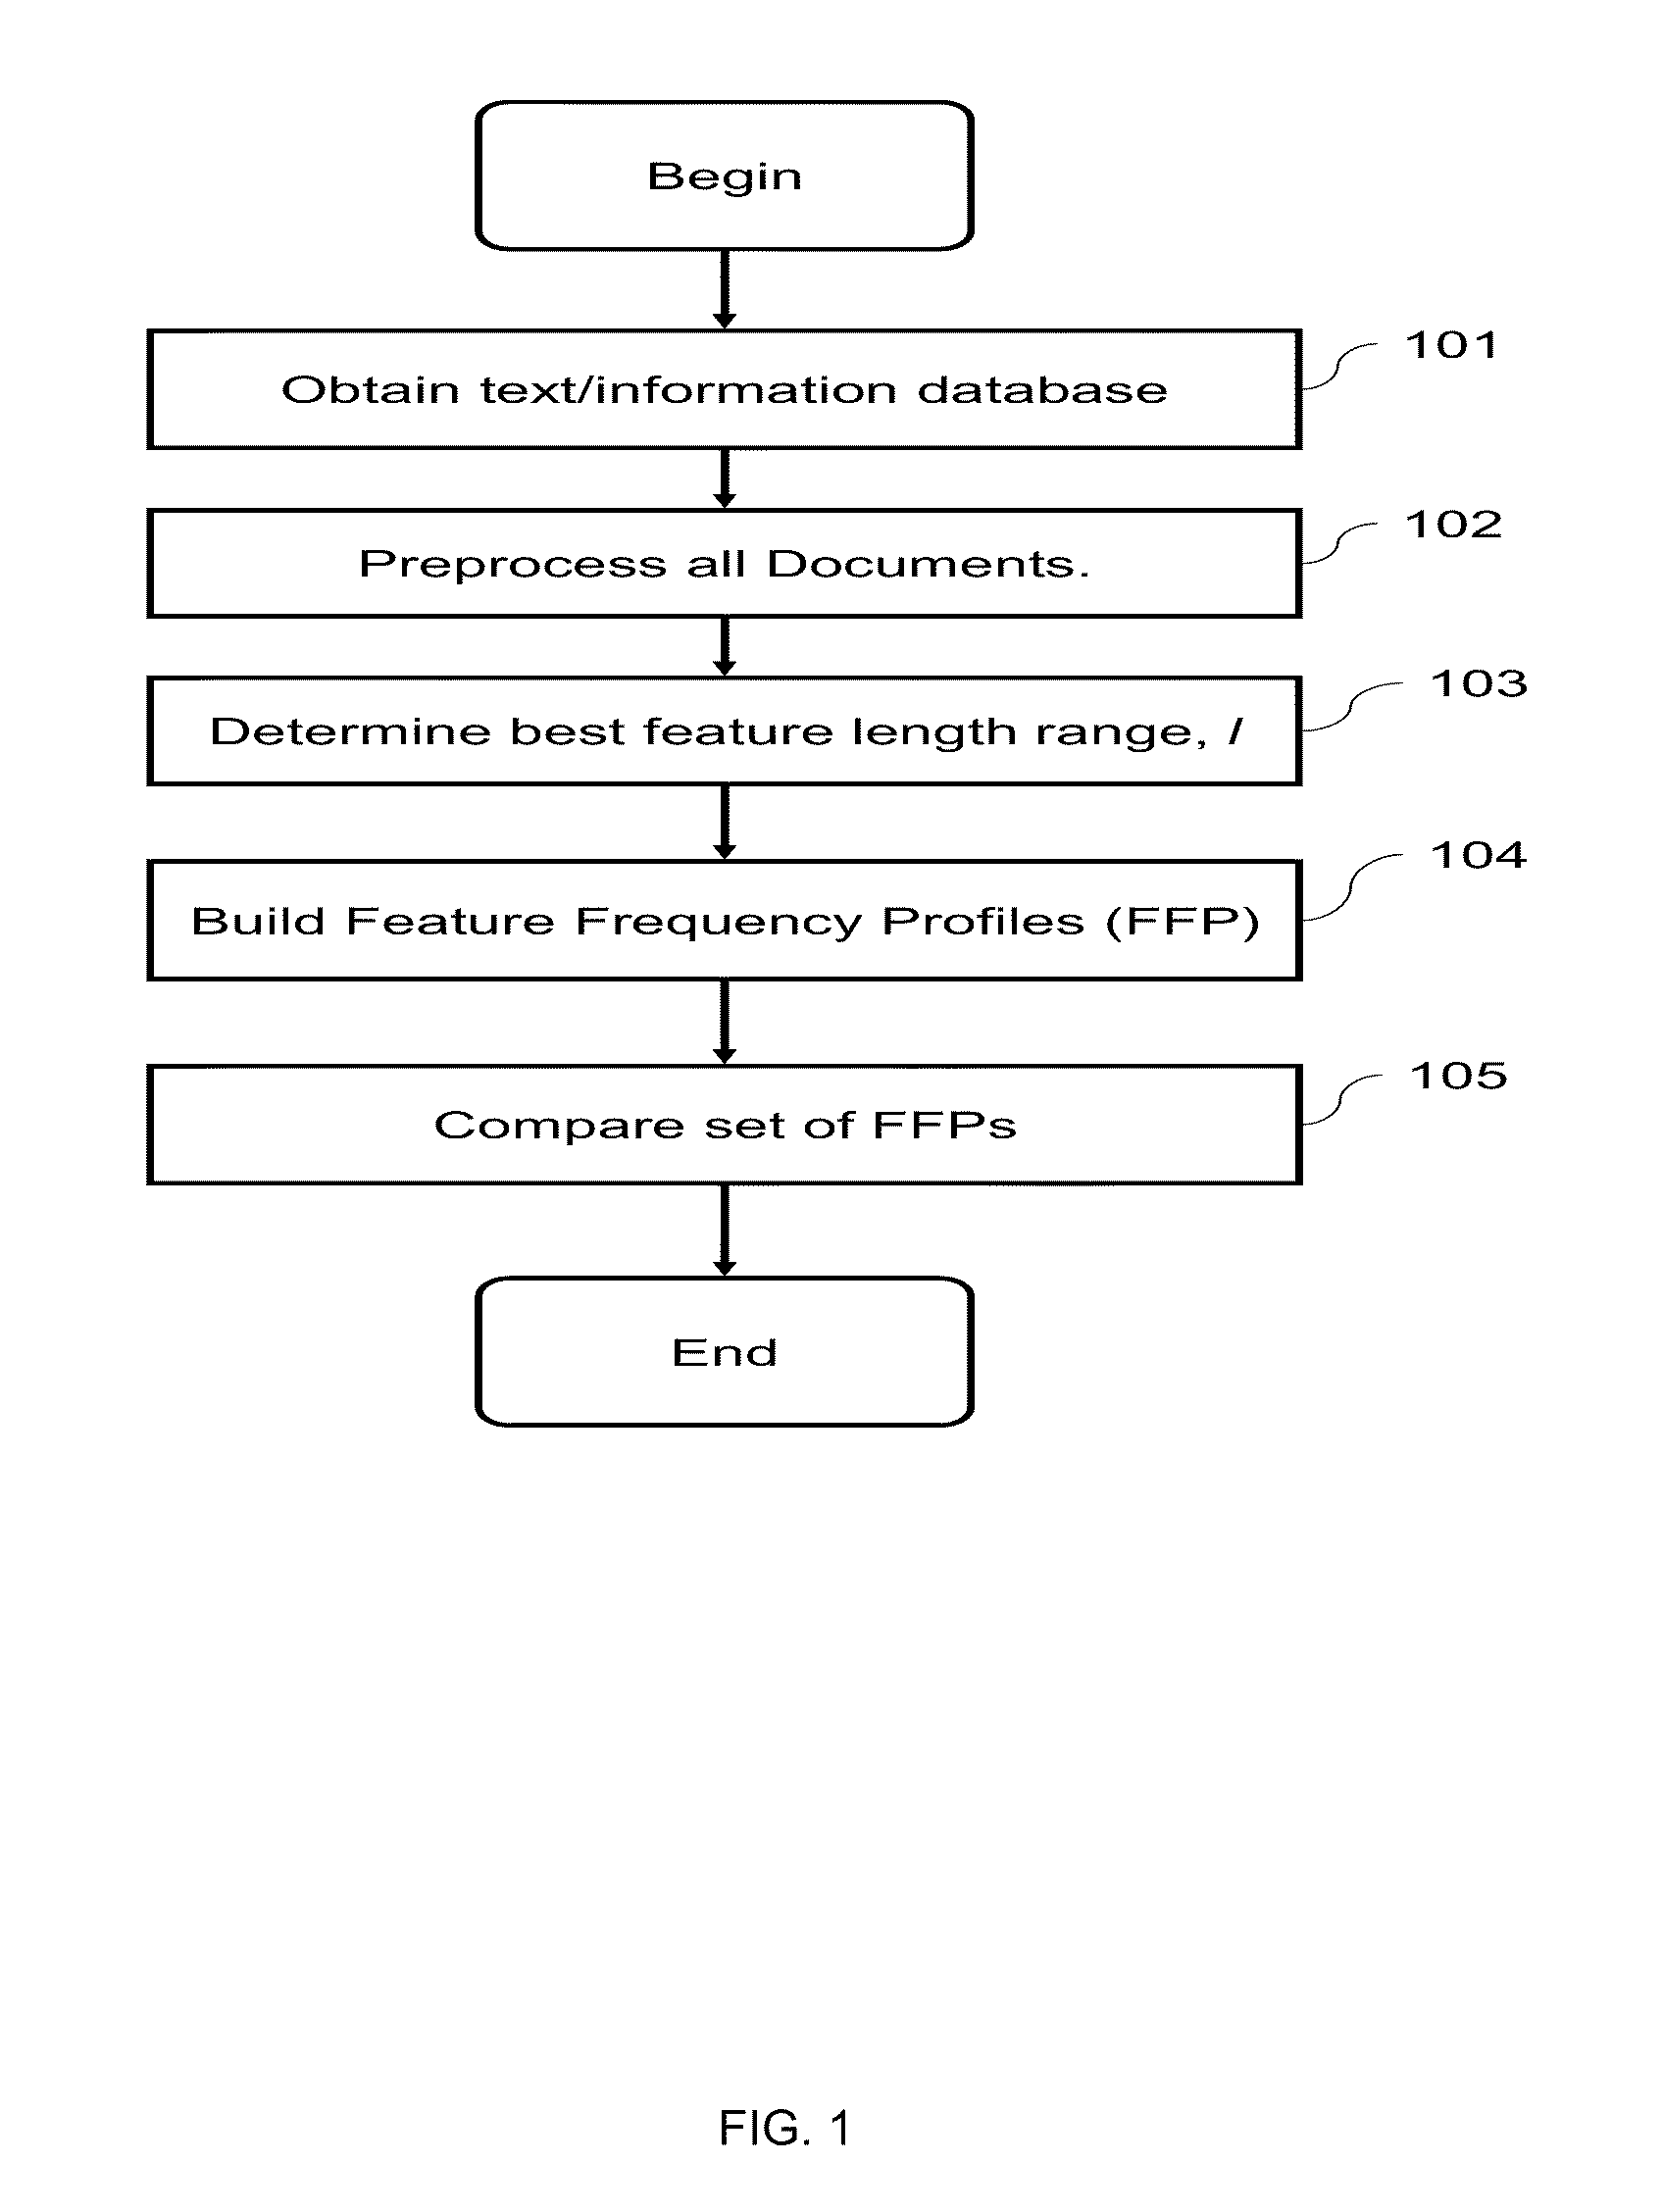 Computational Method for Comparing, Classifying, Indexing, and Cataloging of Electronically Stored Linear Information